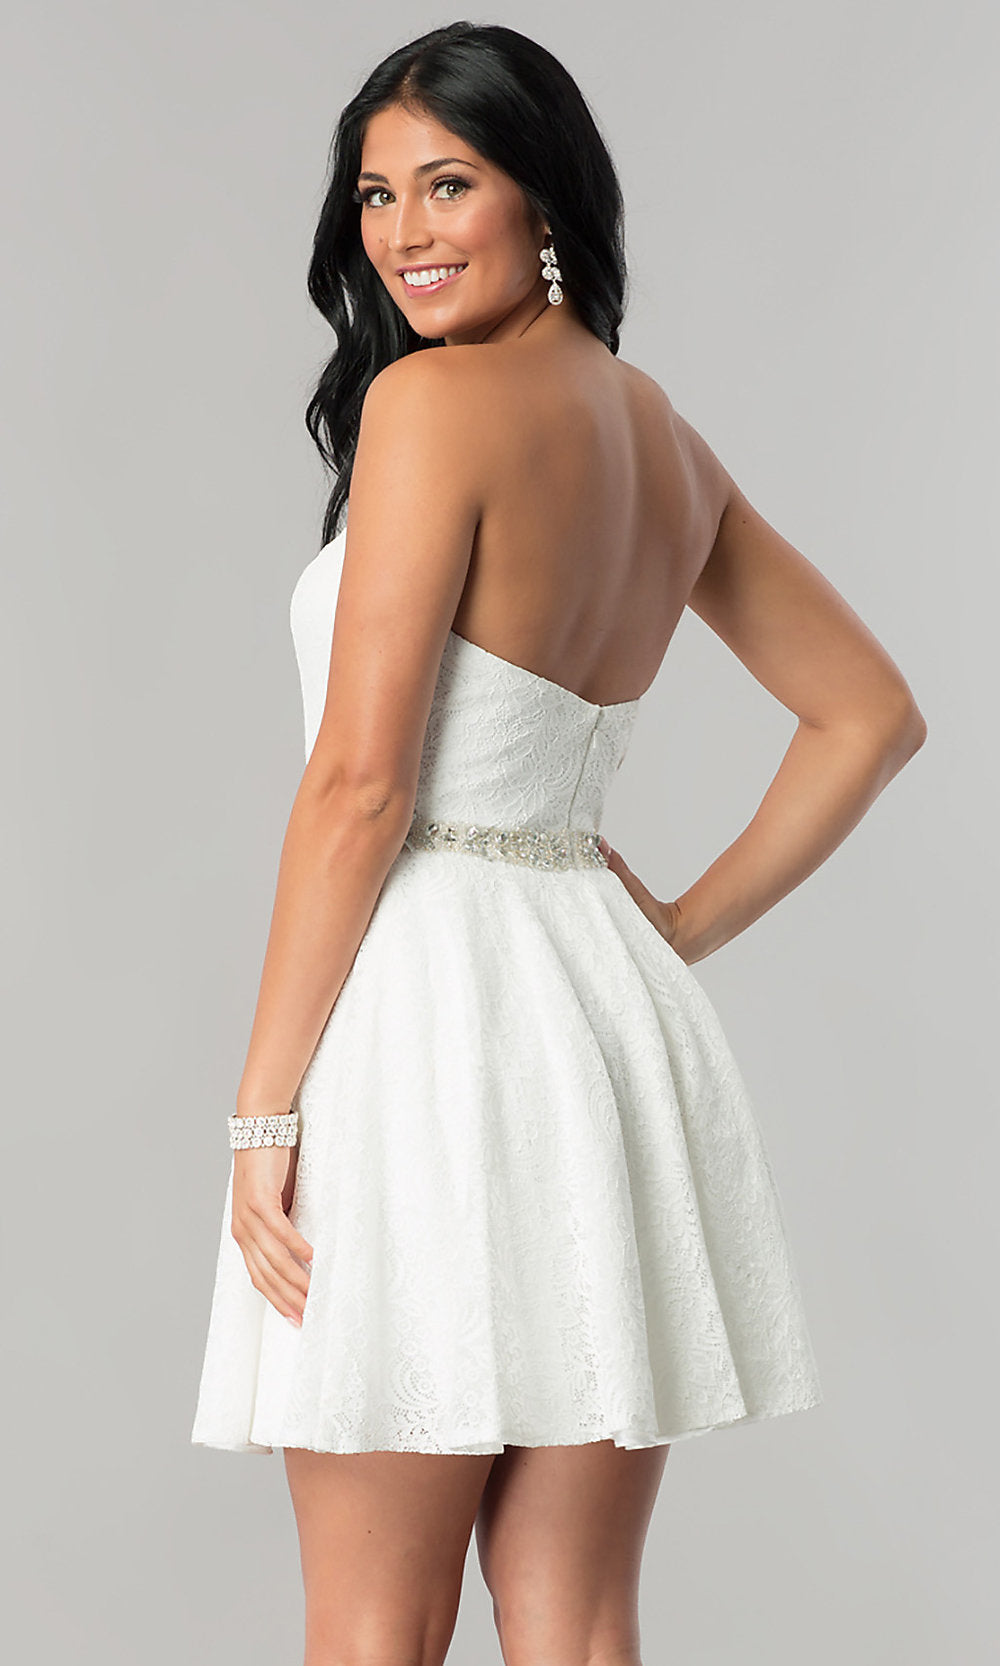 Lace Strapless Short Homecoming Dress - PromGirl